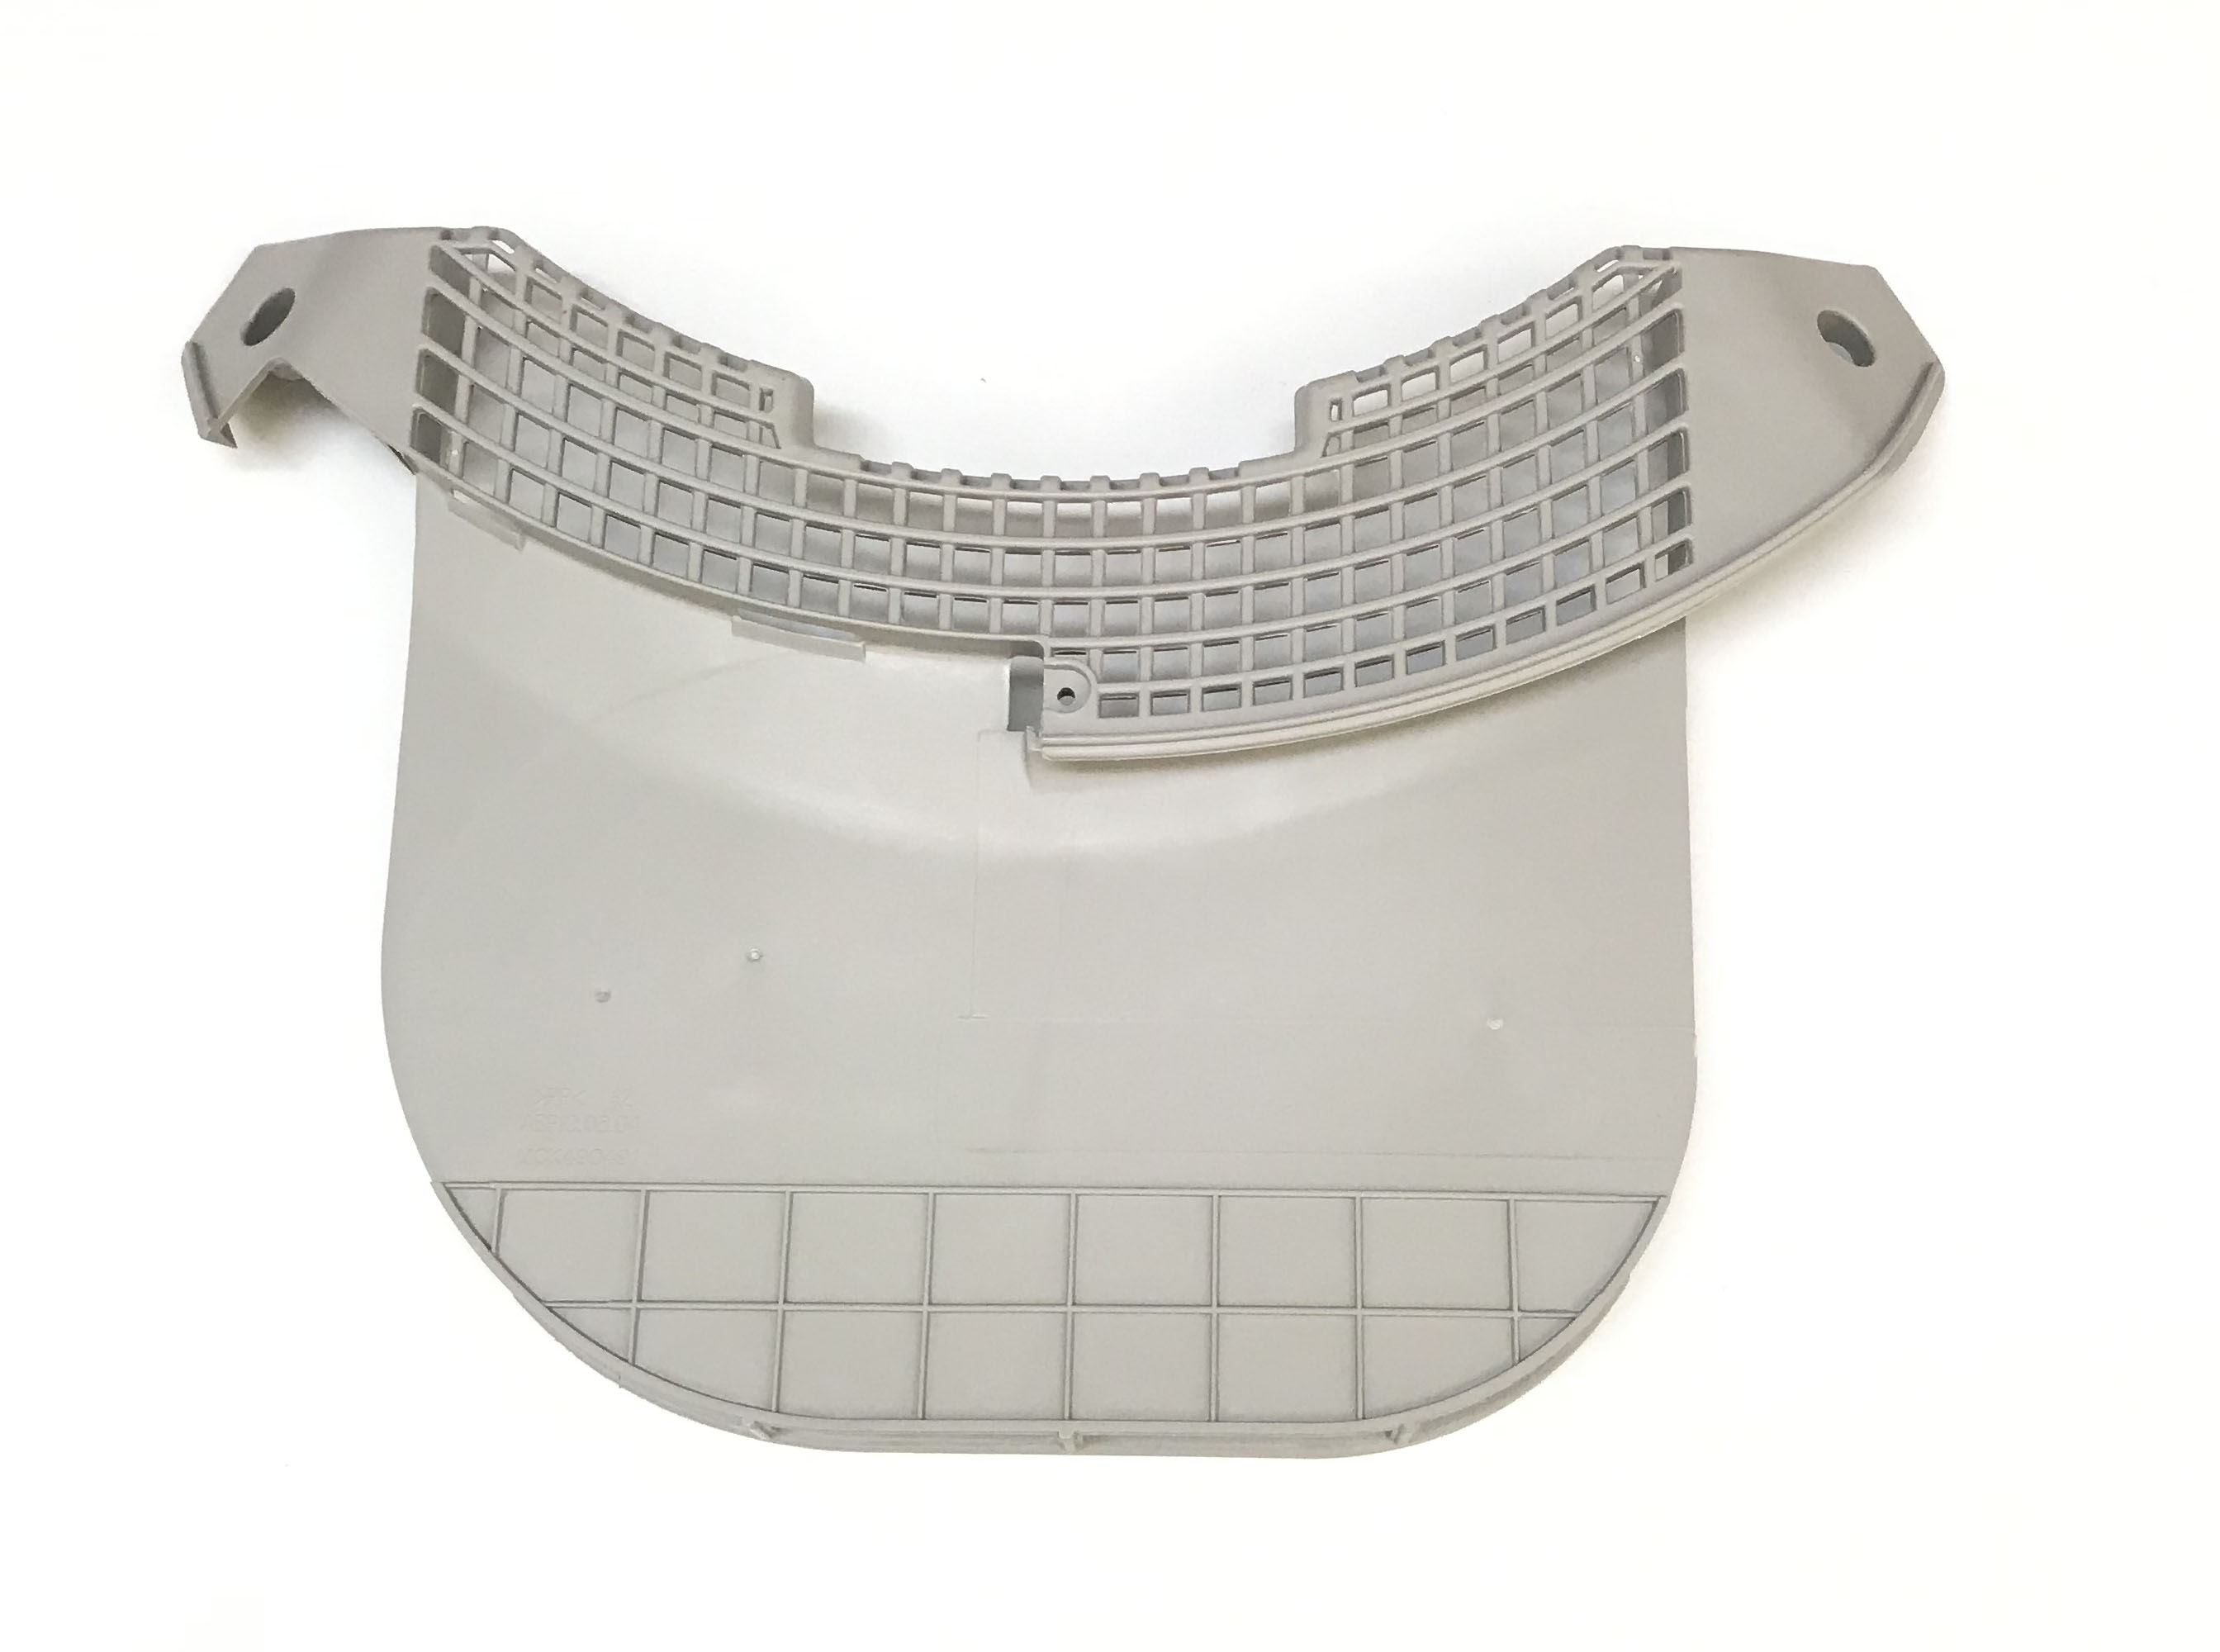 LG OEM LG Dryer Lint Filter Cover Guide Originally Shipped With DLE3075W, DLE3095W, DLE3500W, DLEX3250V